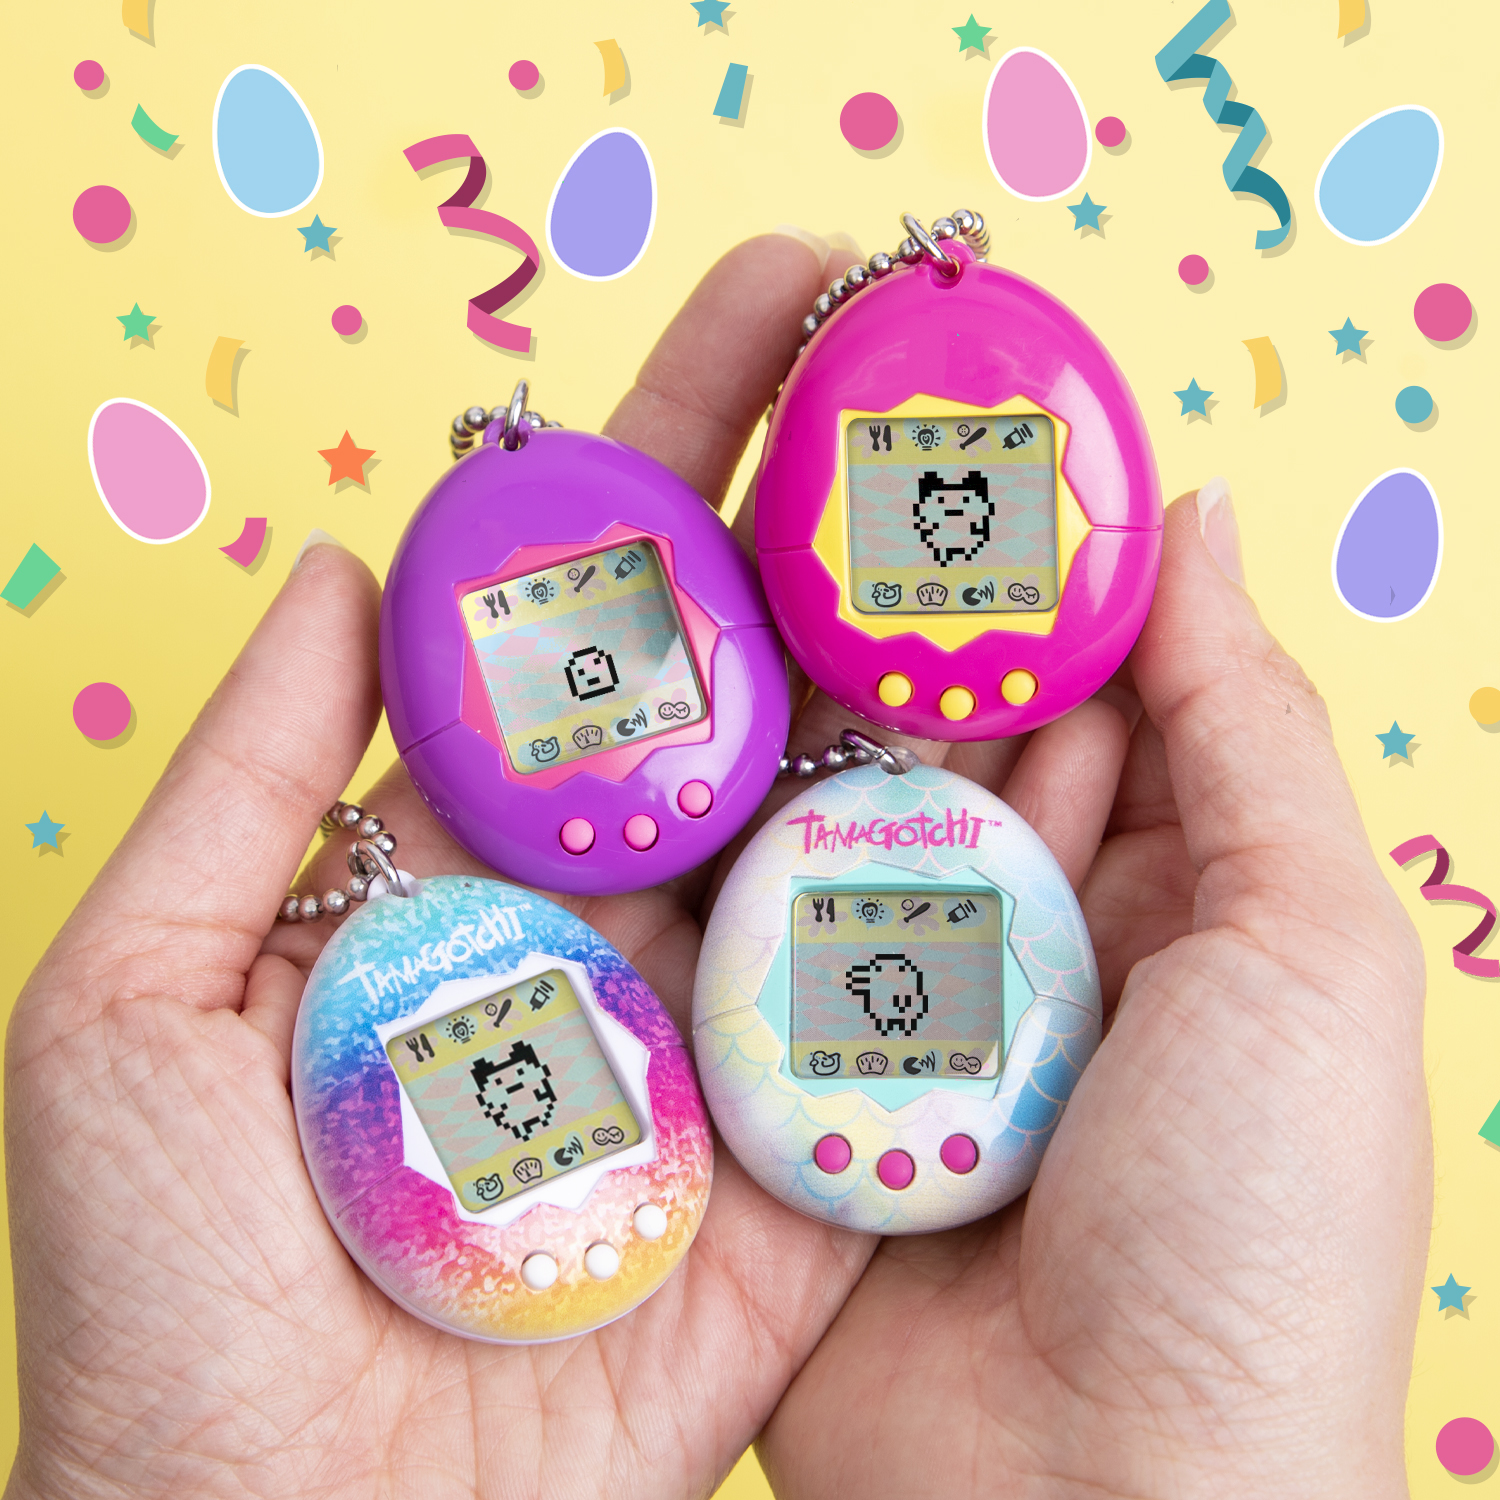 Tamagotchi US on Twitter: "RT if raising your virtual pet from egg to adult  was an exciting journey! #Tamagotchi https://t.co/yjuGIiBZth" / Twitter